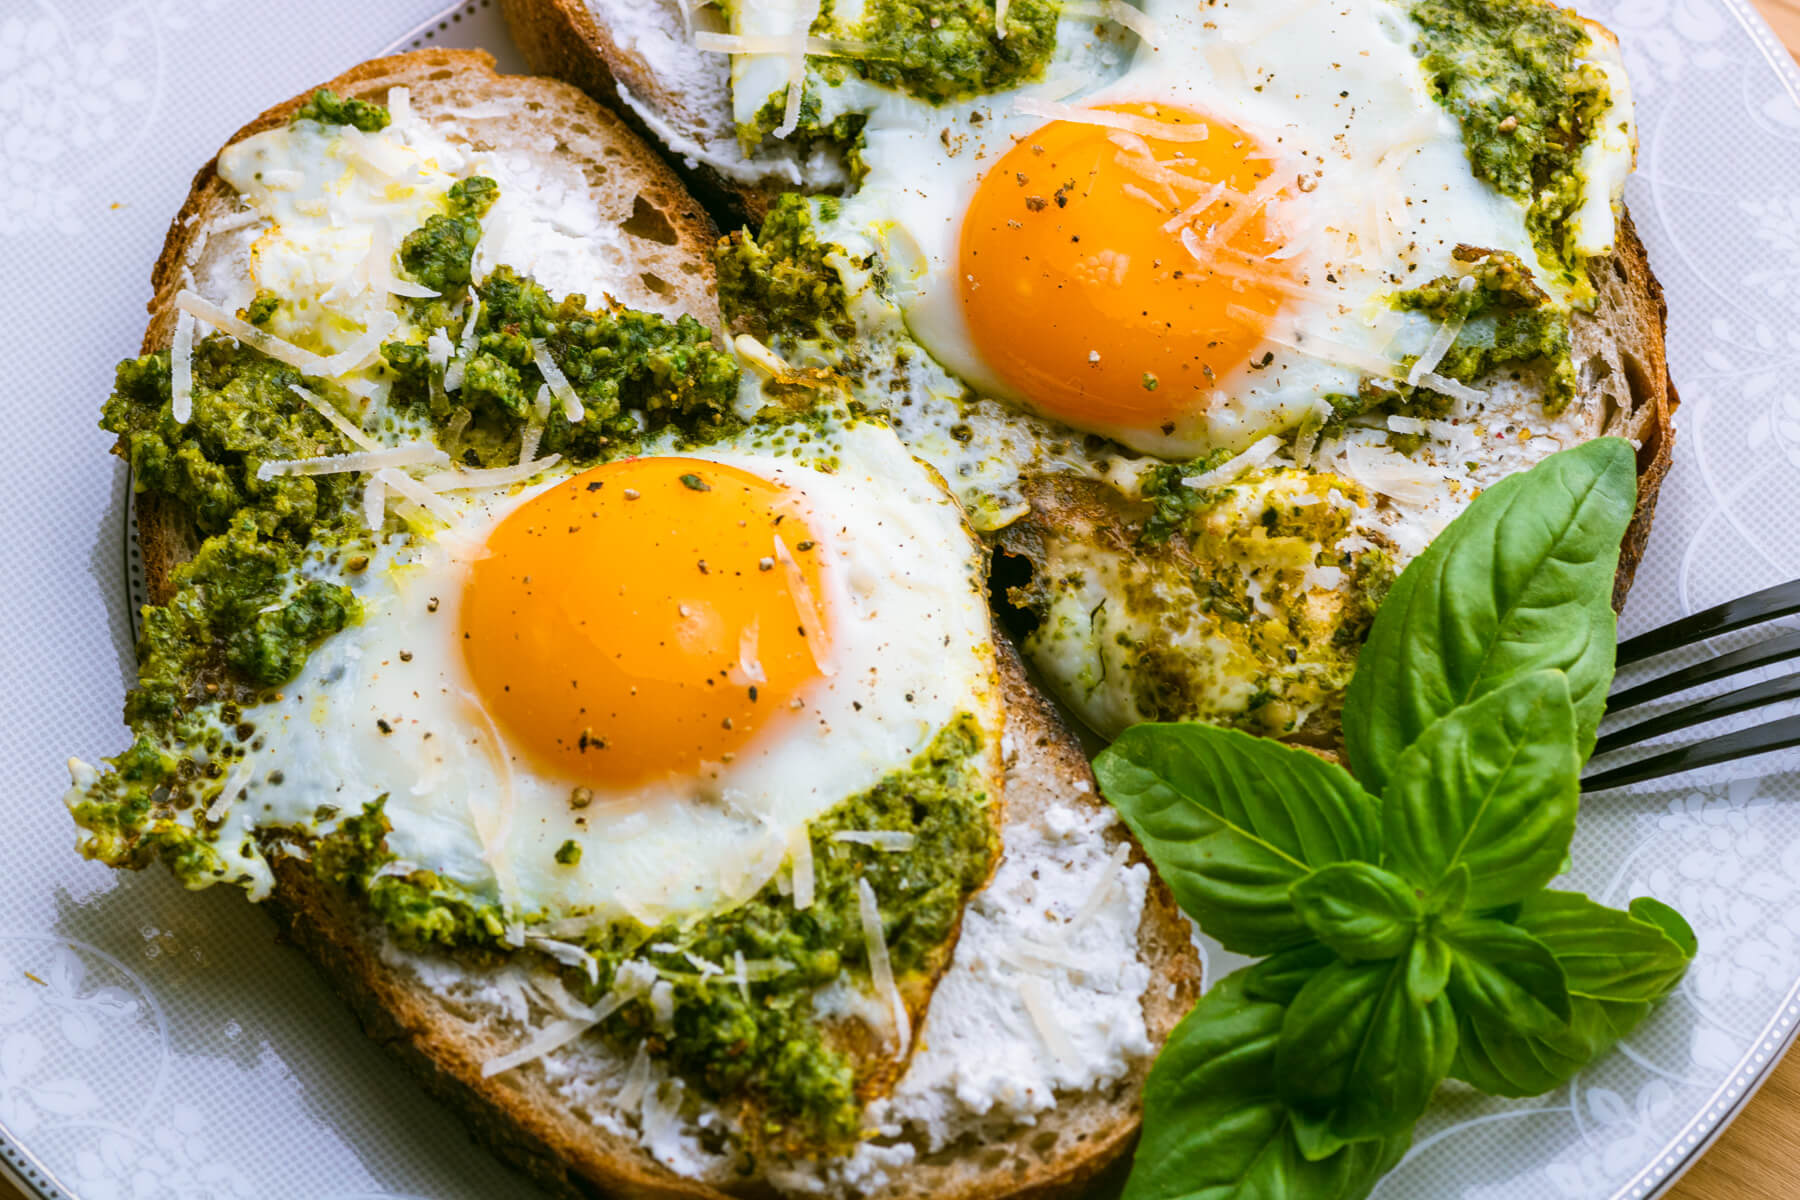 A plate of two fried Pesto Eggs on toast with sunny side up yellow egg yolks and vibrant green basil pesto.